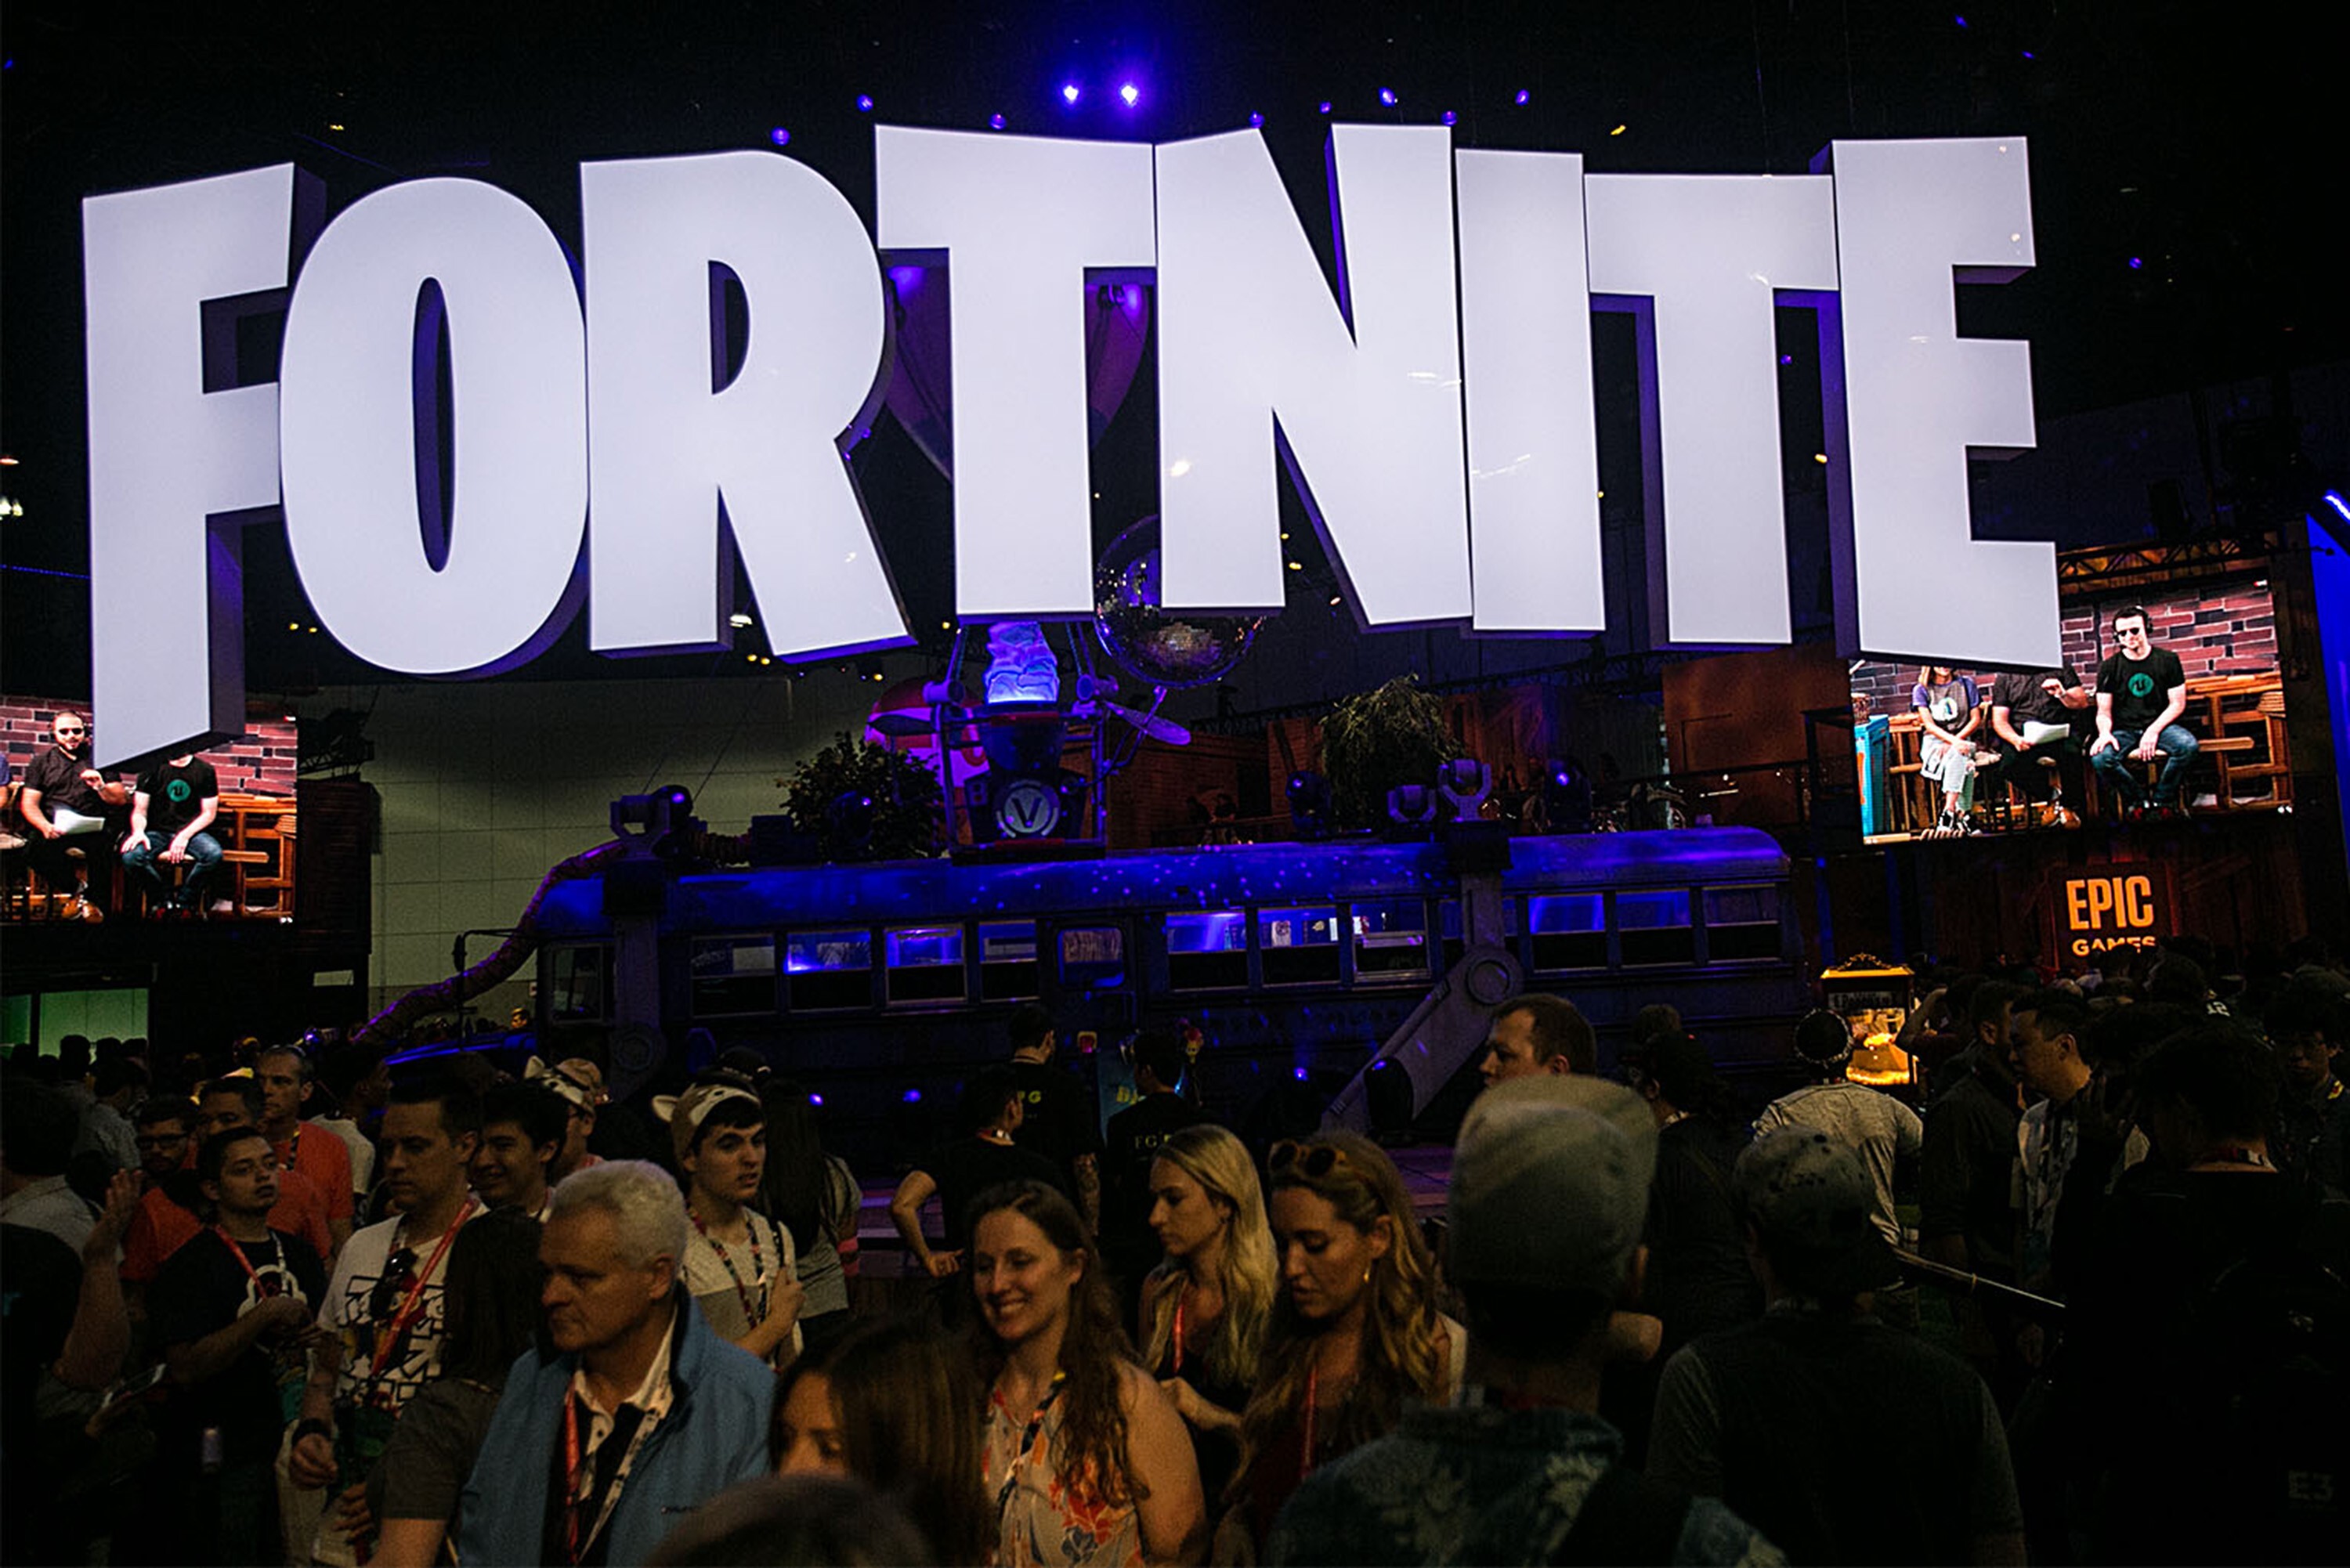 The Fortnite display, presented by Epic Games at the Electronic Entertainment Expo (E3) at the Los Angeles Convention Centre in June 2018. Photo: TNS